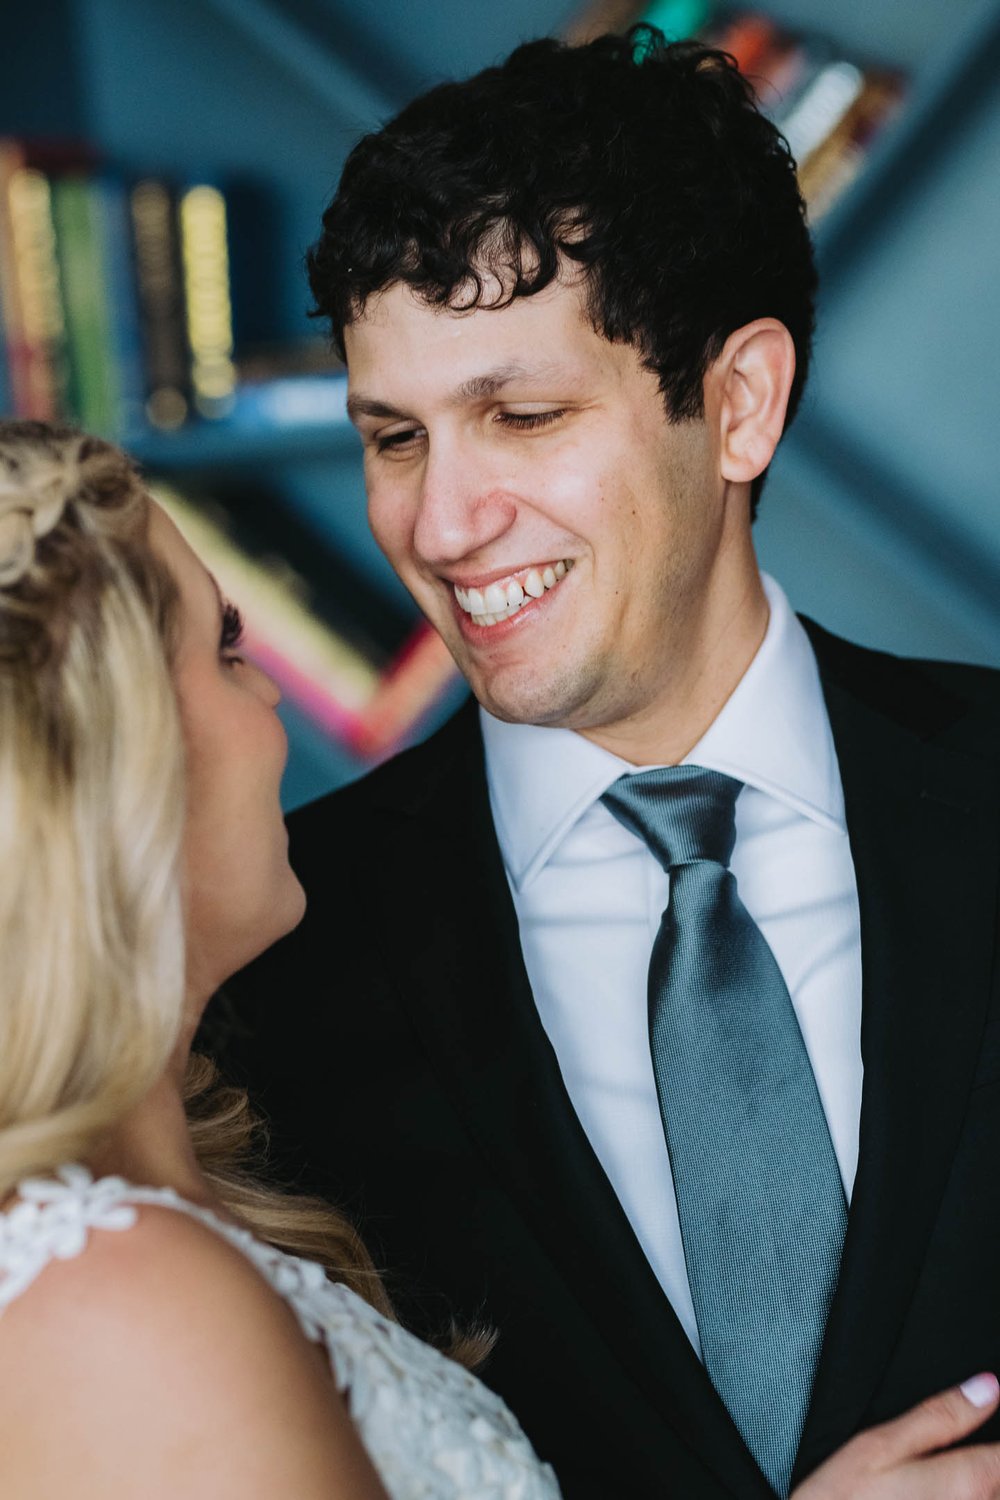 Wedding Day Photos | Ravenswood Event Center | J. Brown Photography | groom looks to his bride